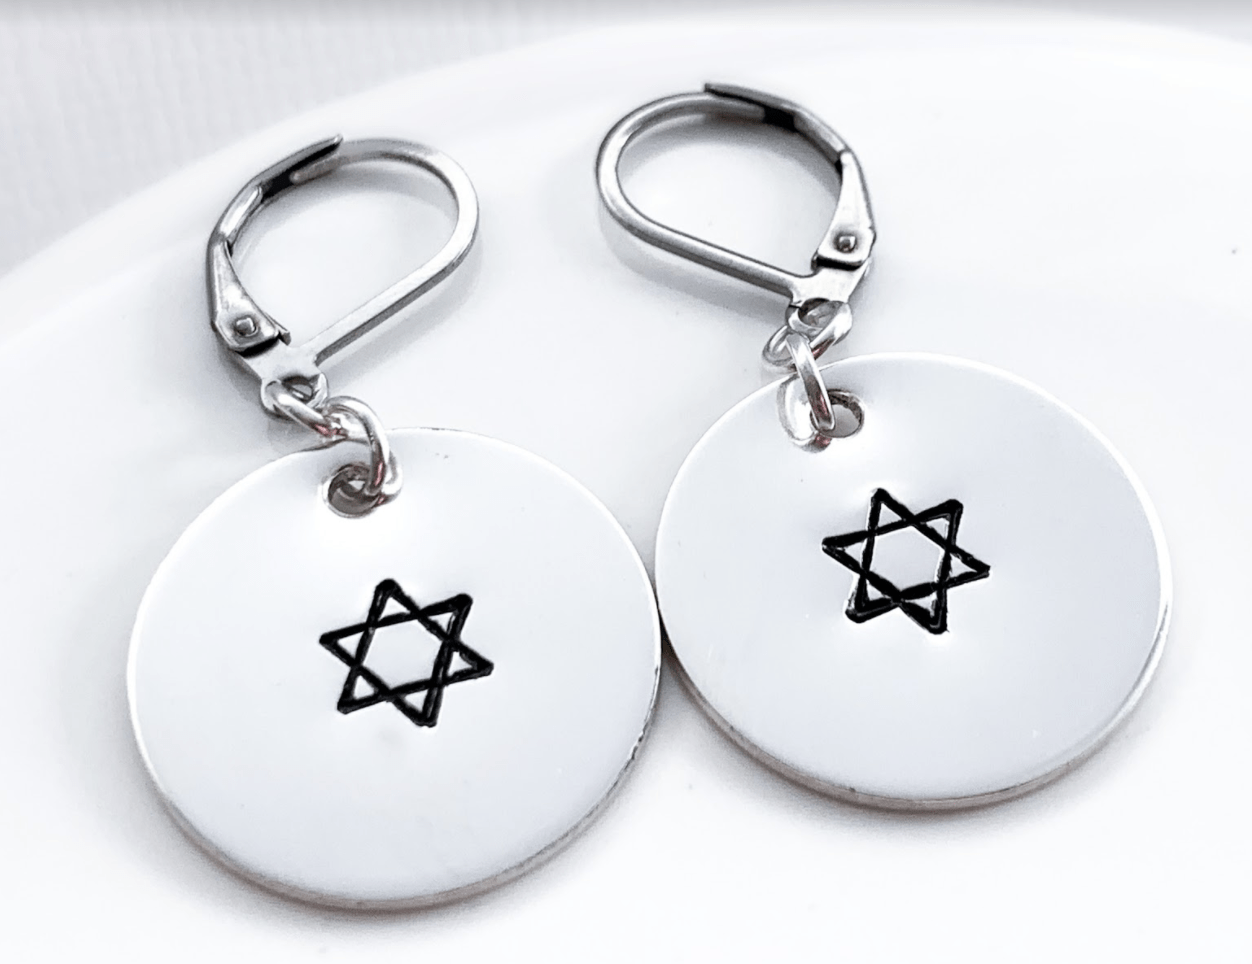 Everything Beautiful Earrings Sterling Silver Star of David Earrings - Sterling Silver